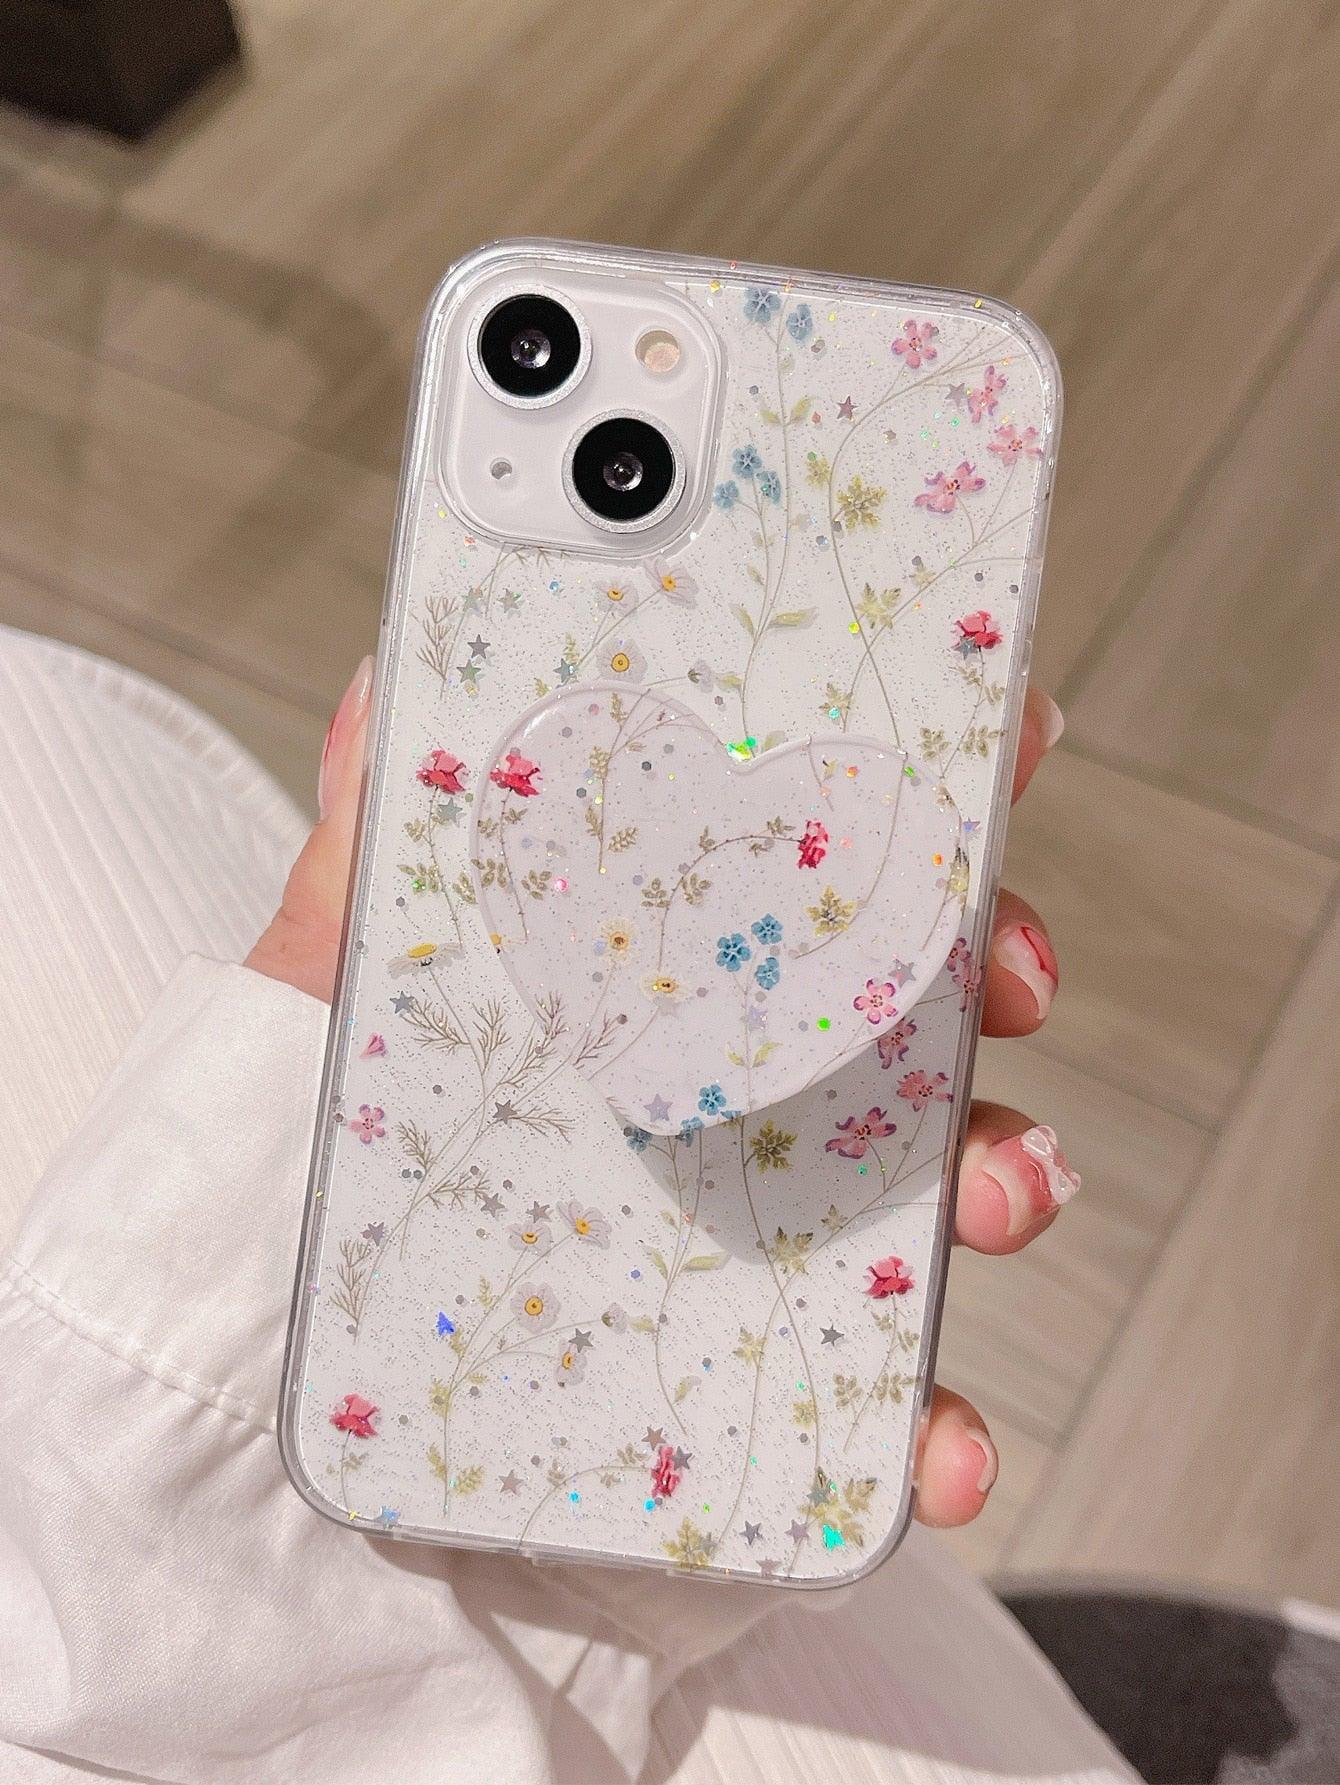 Floral Phone Case With Heart Stand-Out Phone Grip - Lasercutwraps Shop